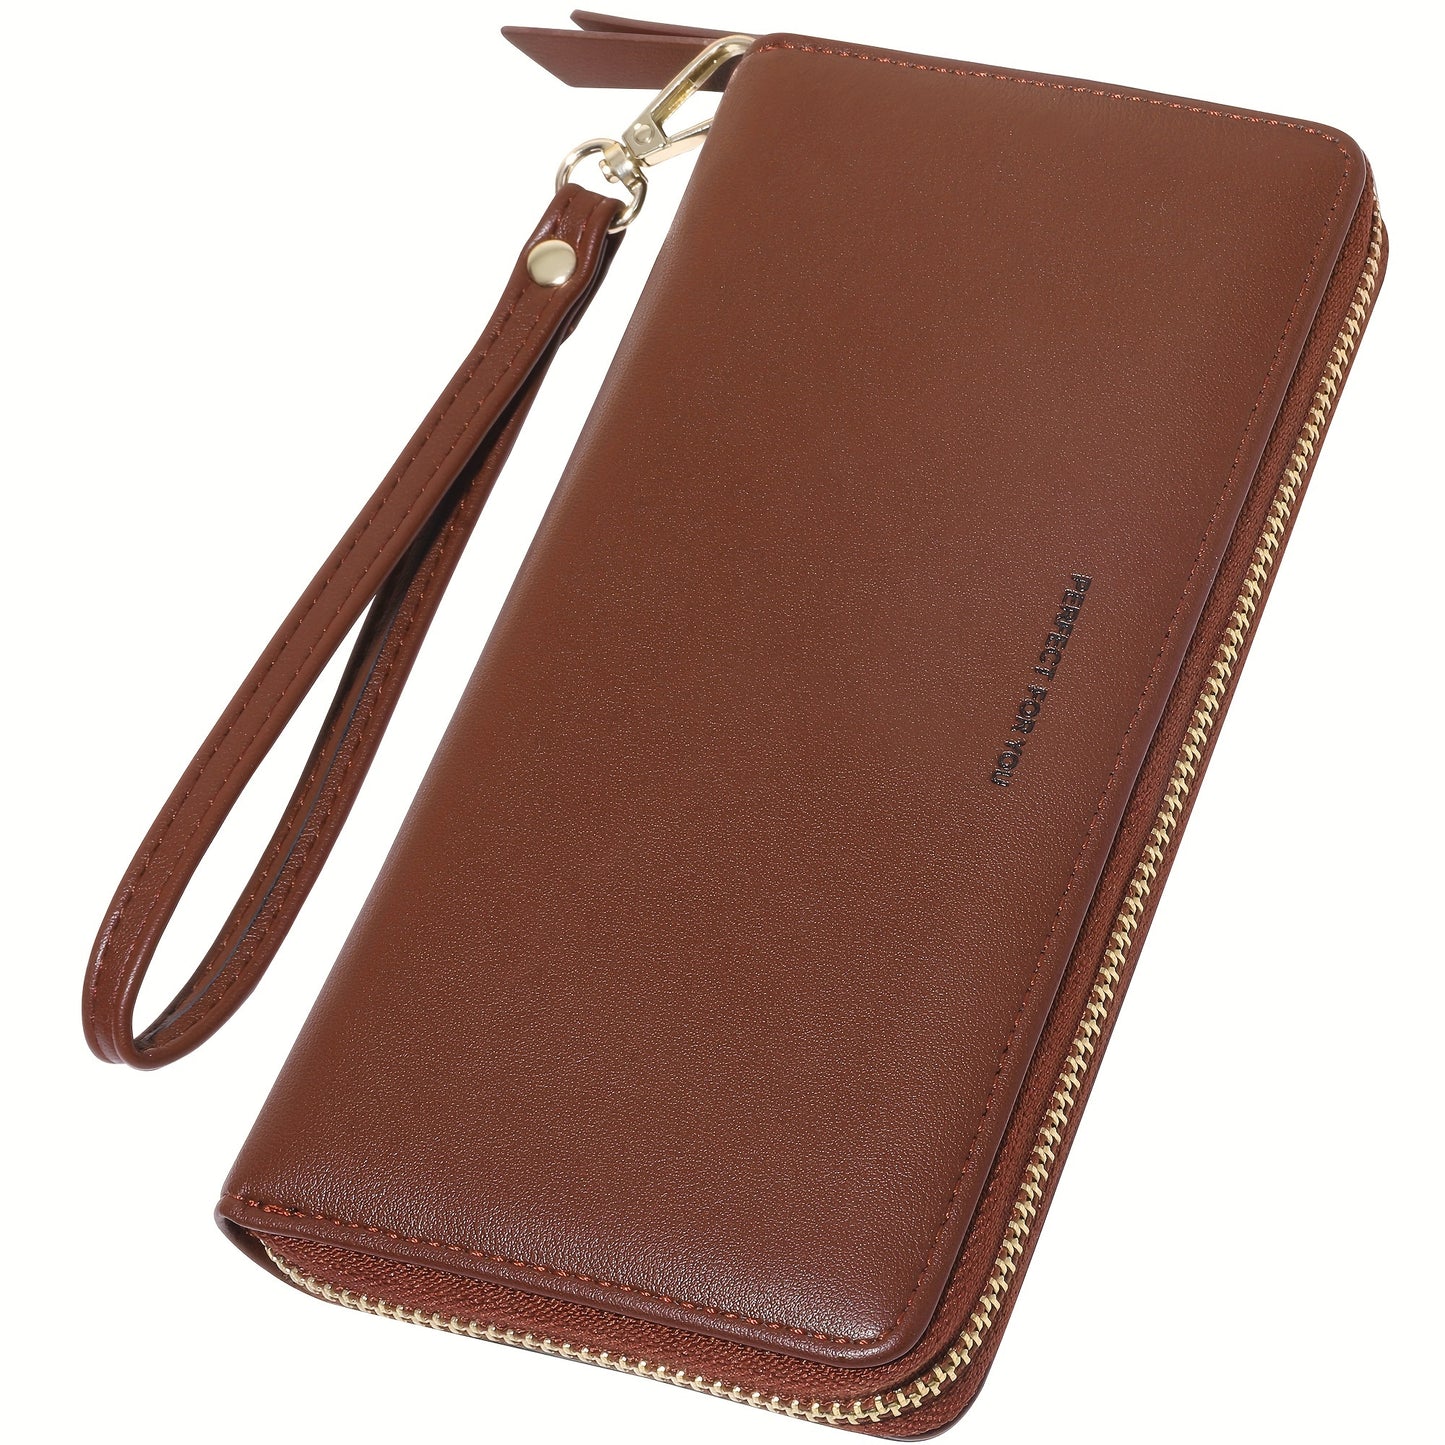 Womens Wallet Zip Around Wallet PU Leather Large Travel Long Purse Credit Card Holder with Wristlet